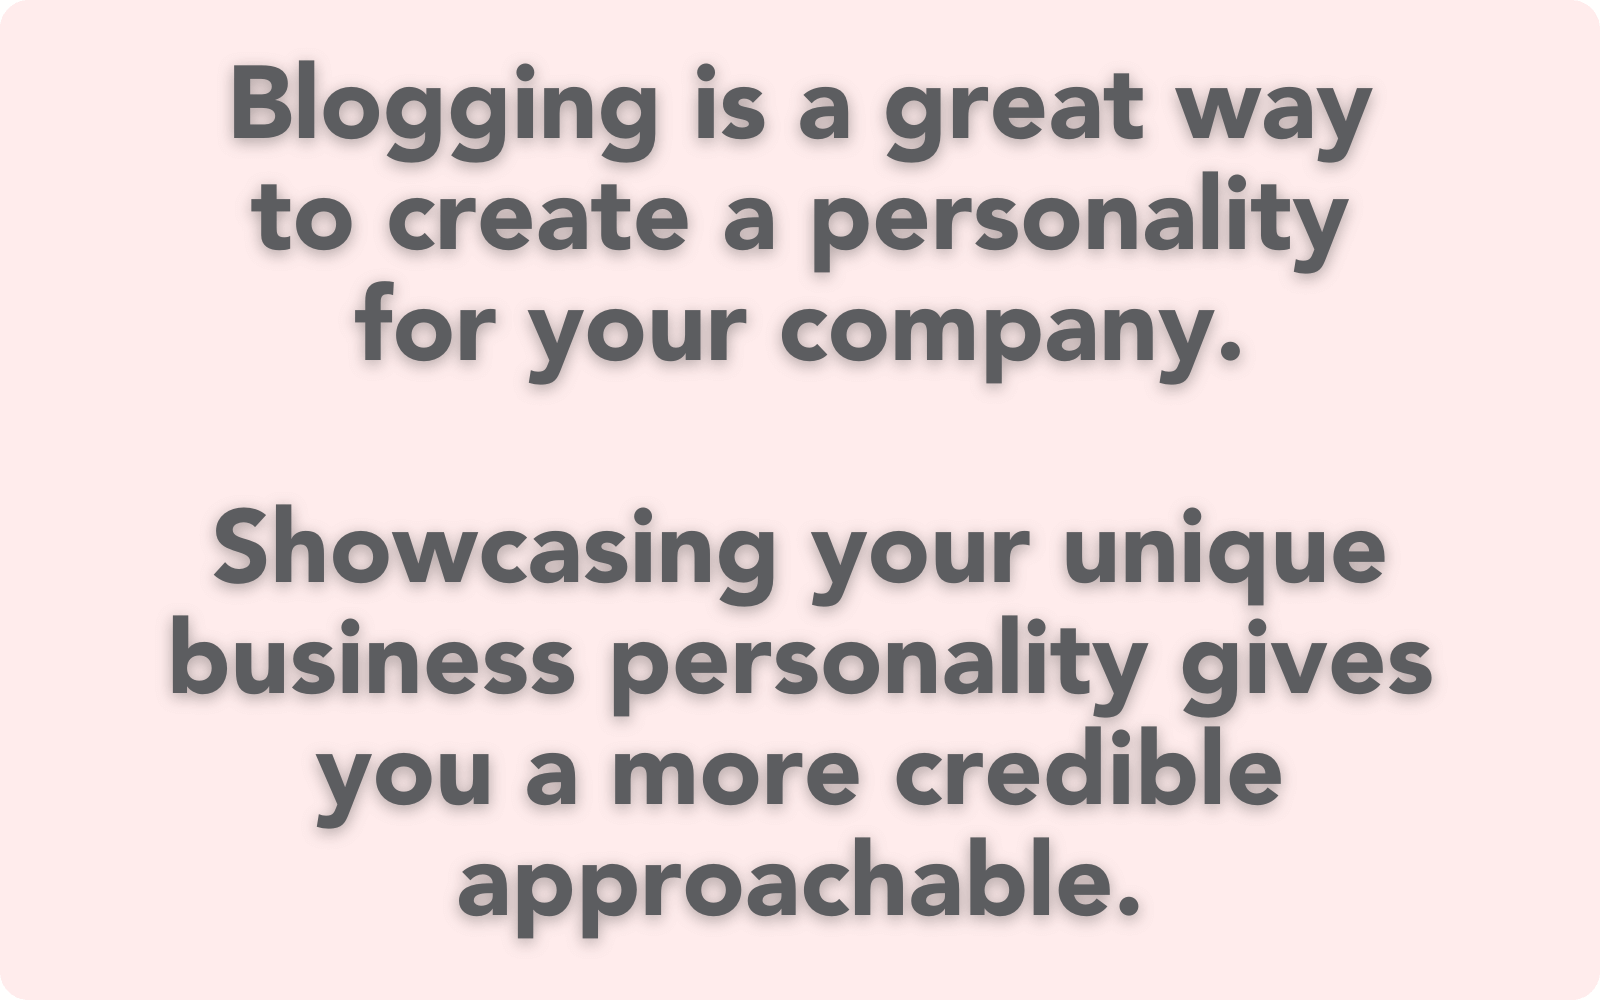 blogging is a great way to create a personality for your company